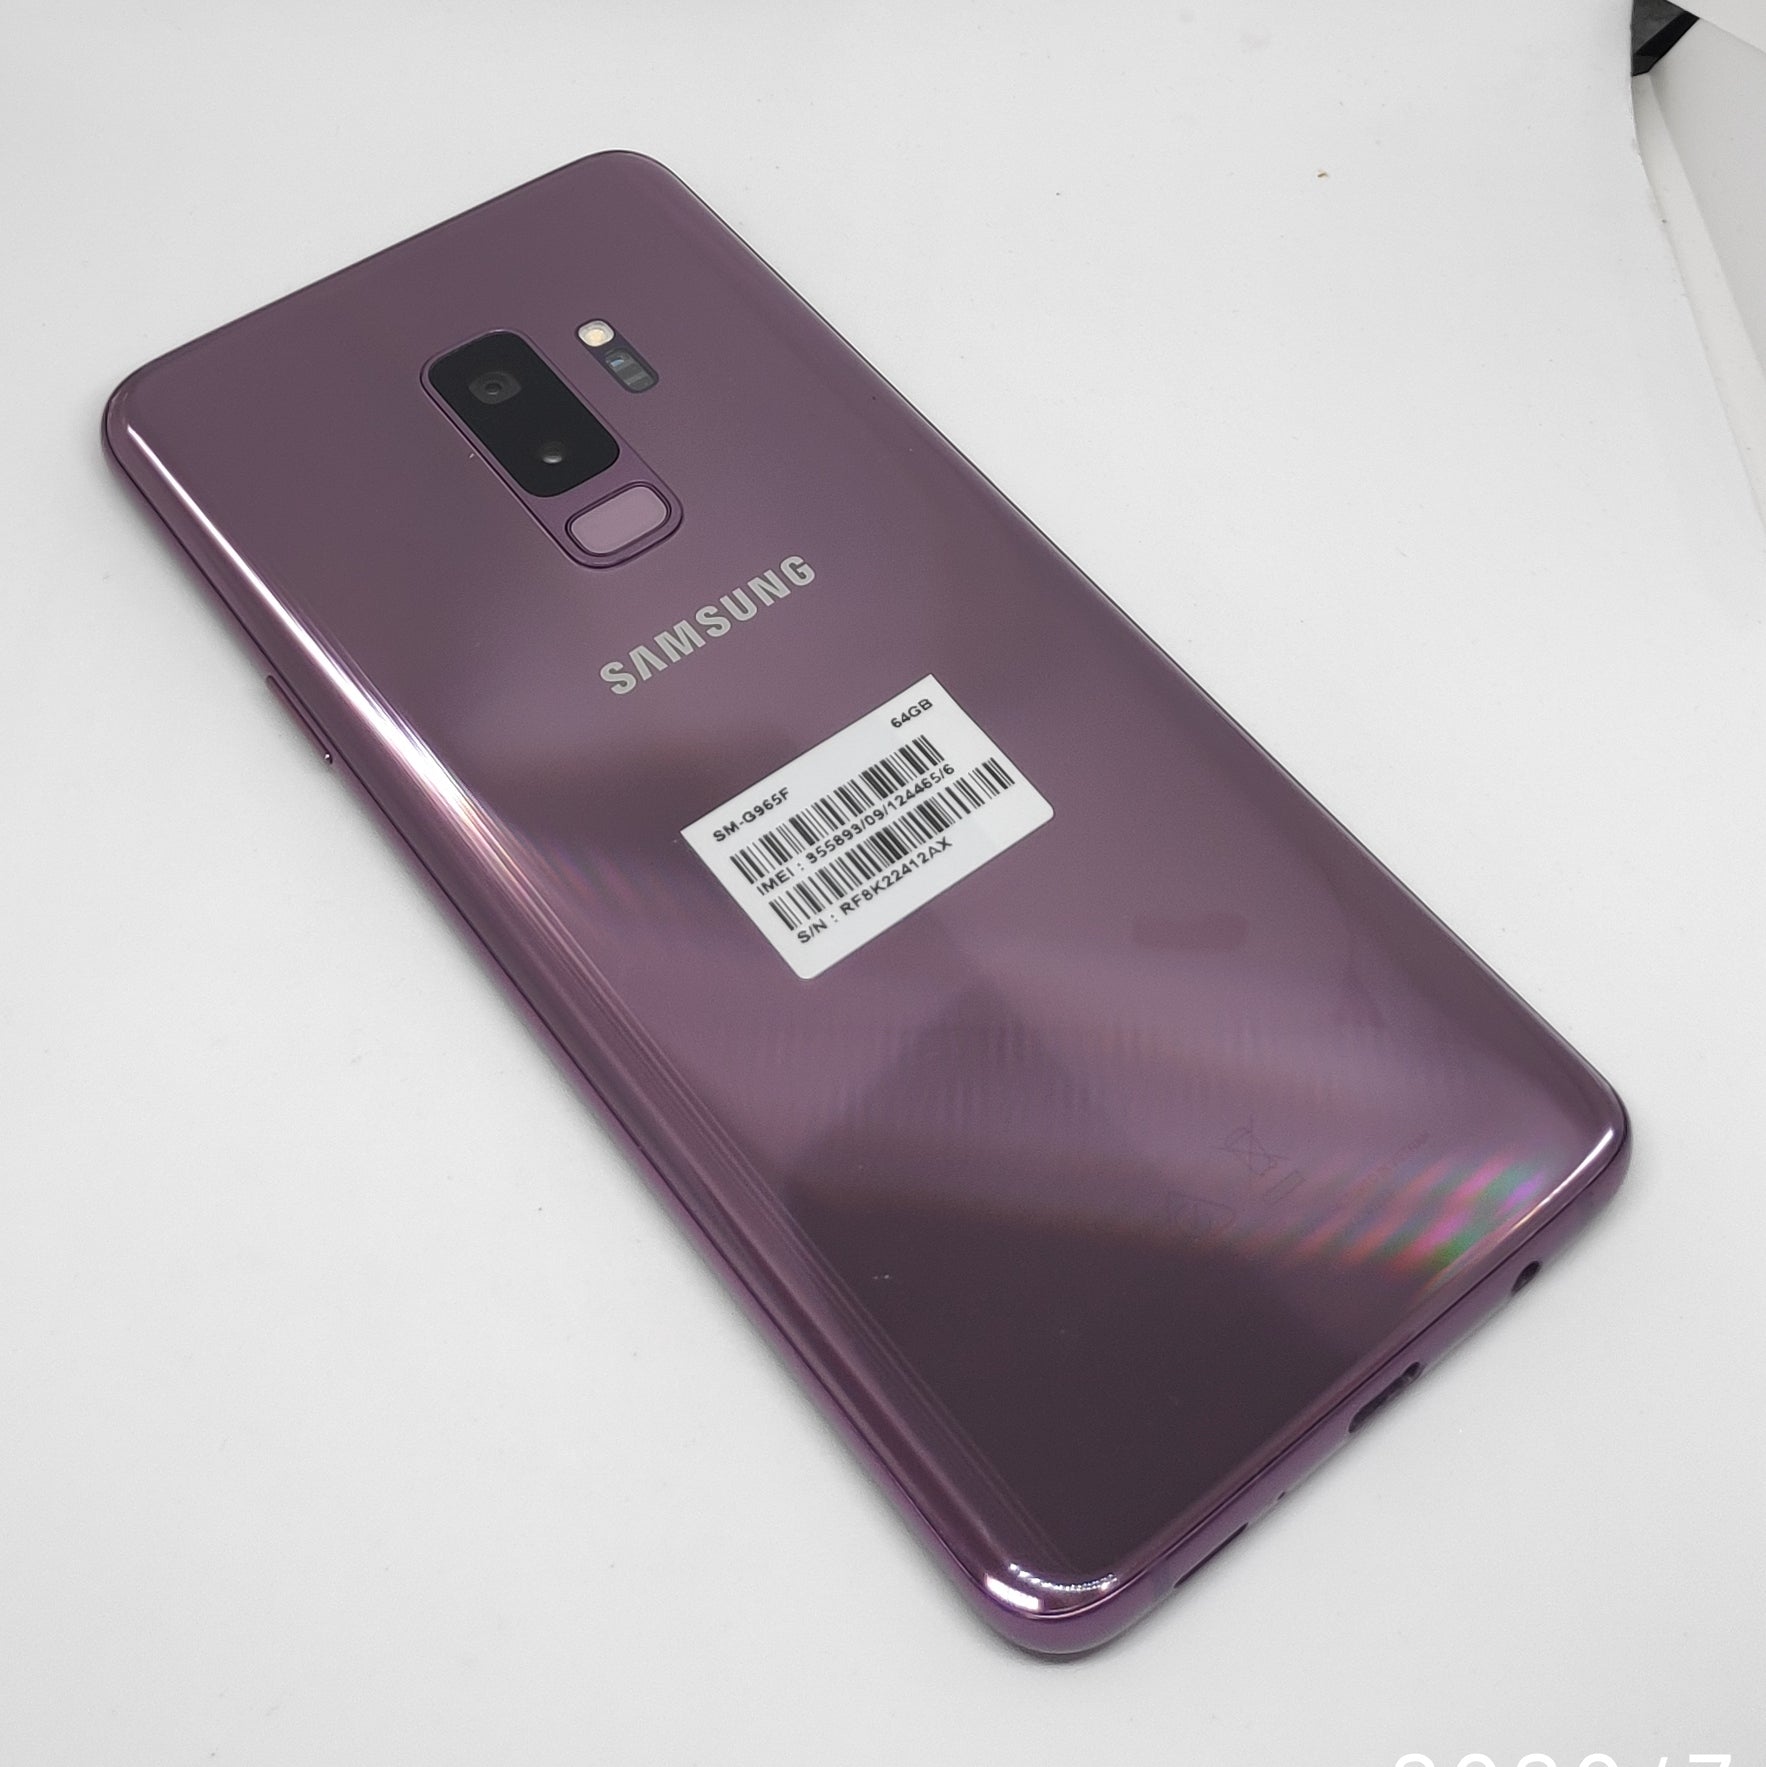 Samsung Galaxy S9 Plus 64GB Purple (Like New) With Case, Screen Protector & Shipping